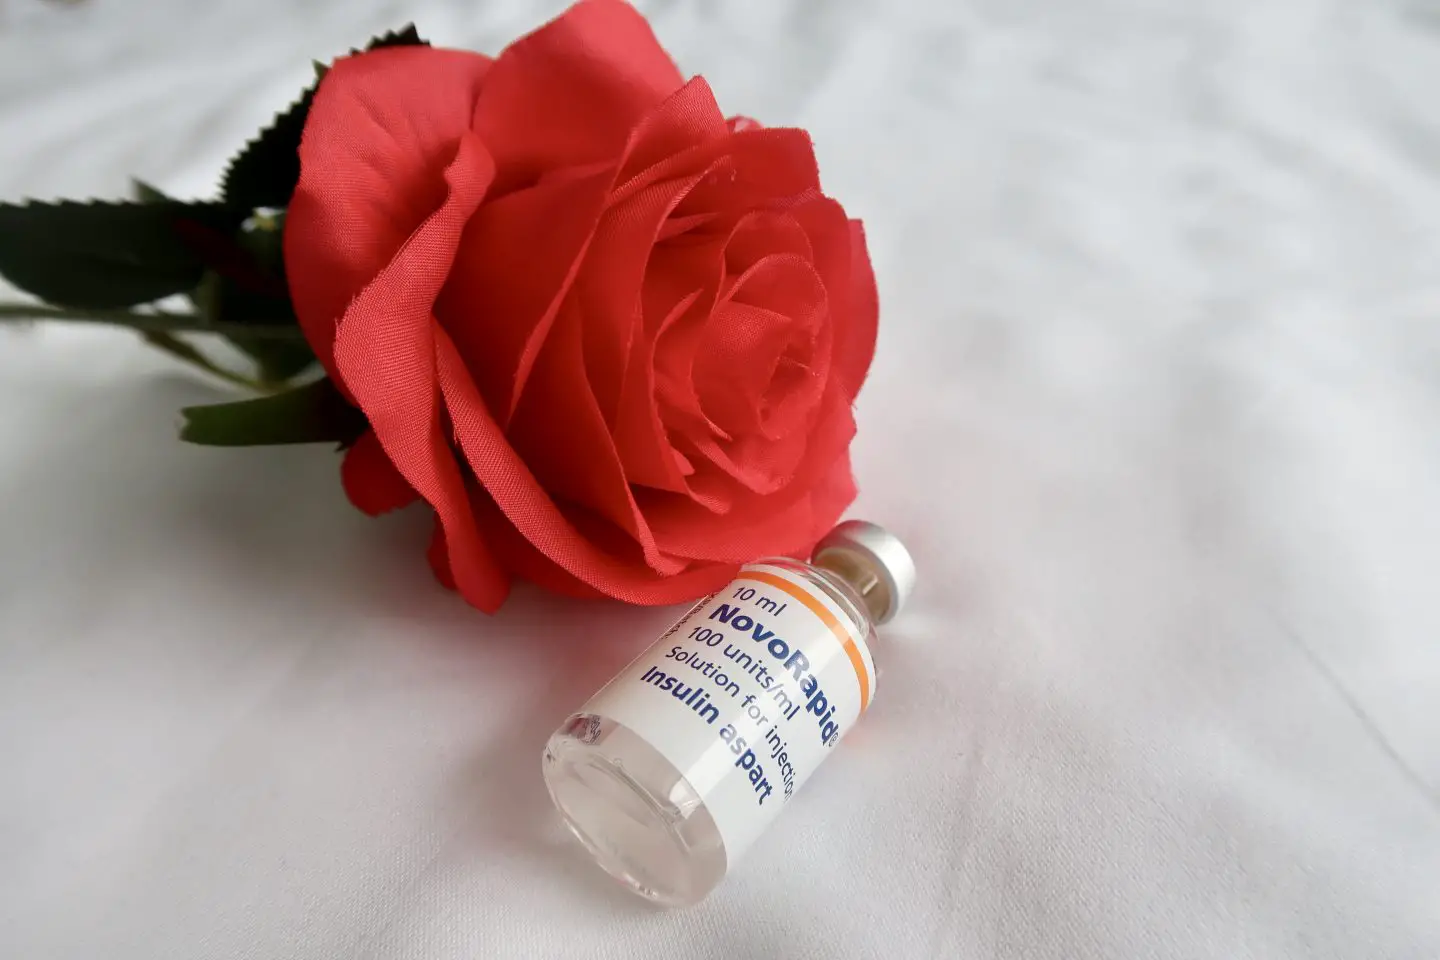 A Novorapid insulin lying in front of a red rose